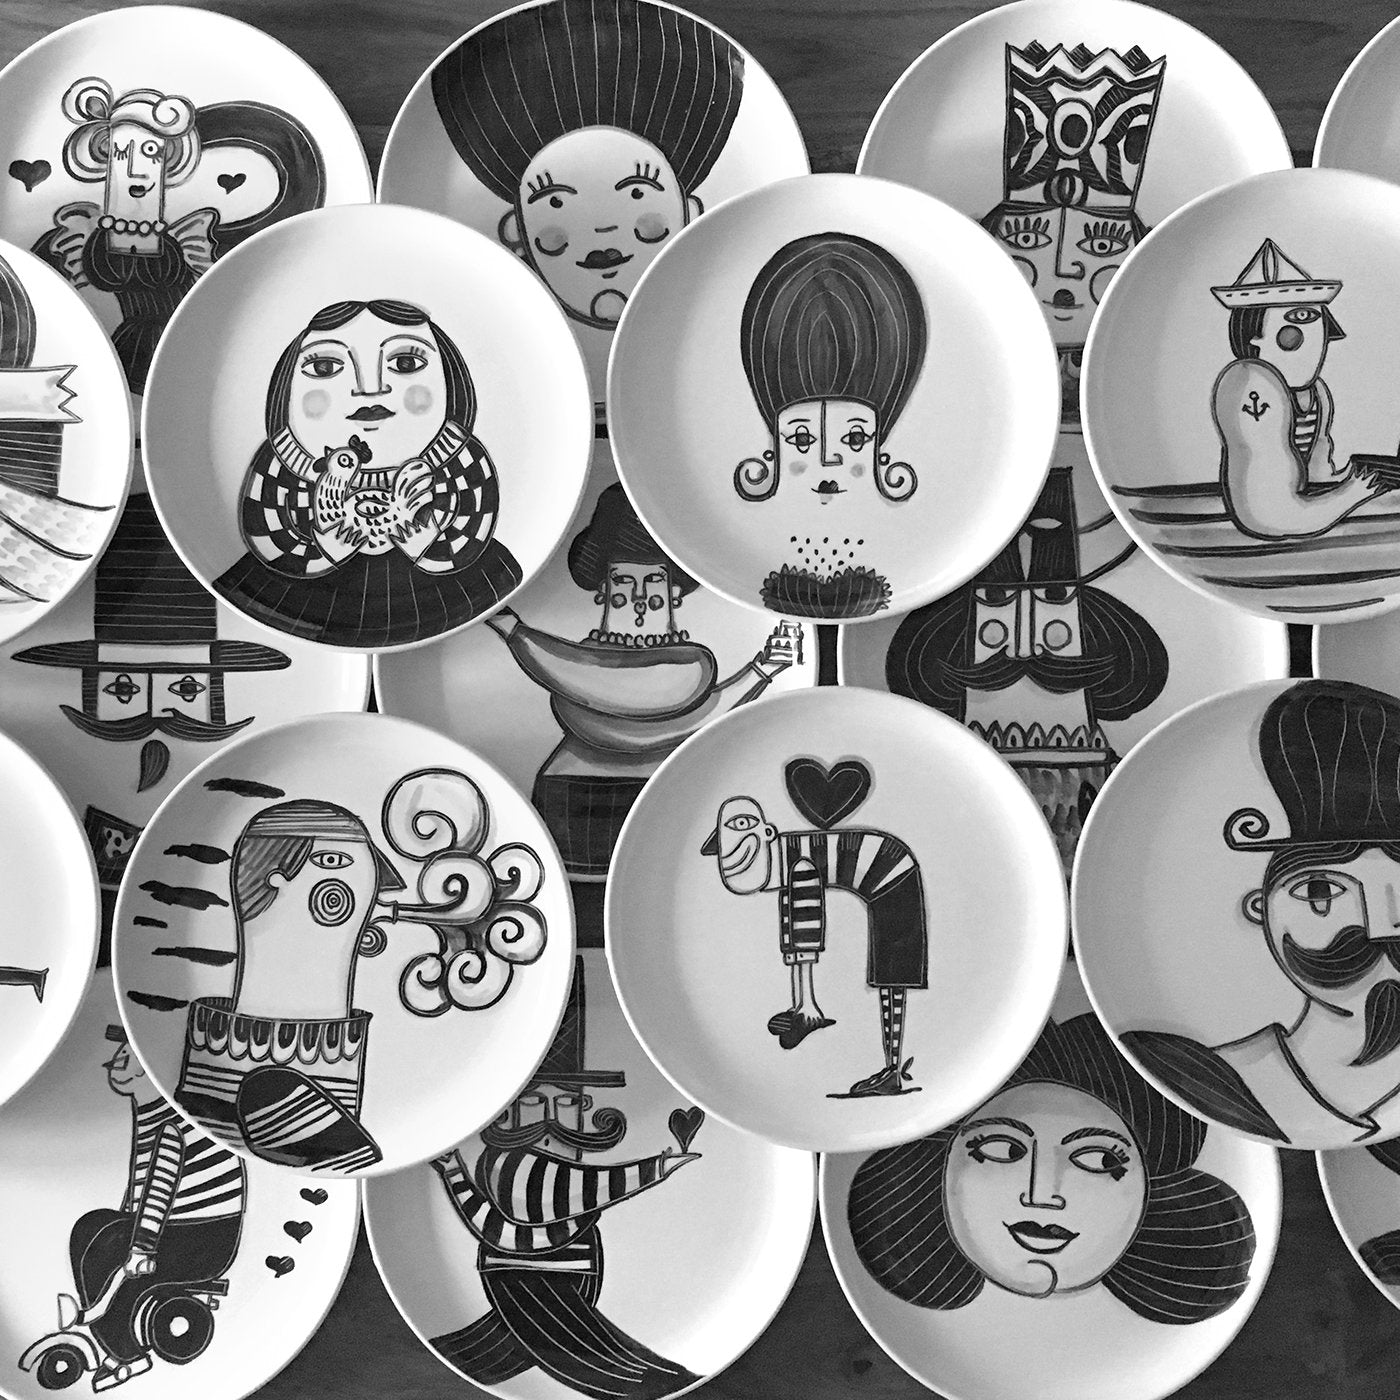 Dario Black and White Stories Plate Collection  - Alternative view 2